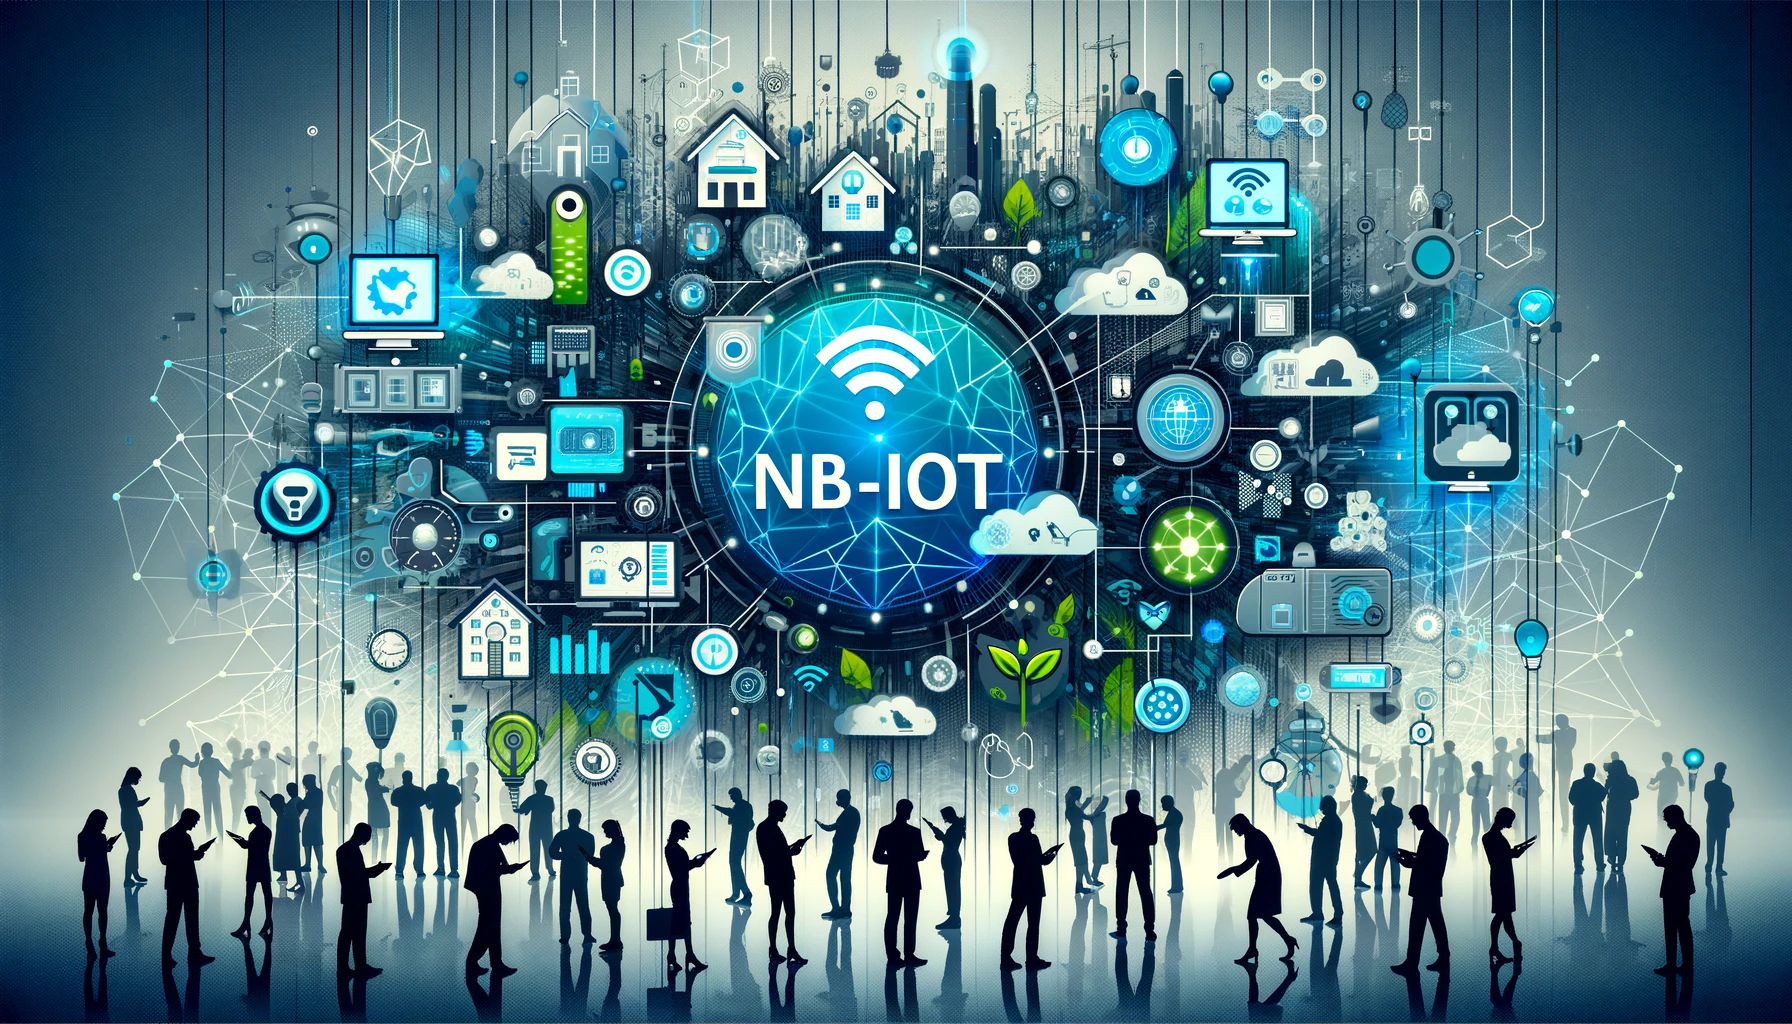 NB-Iot står for NarrowBand Internet of Things